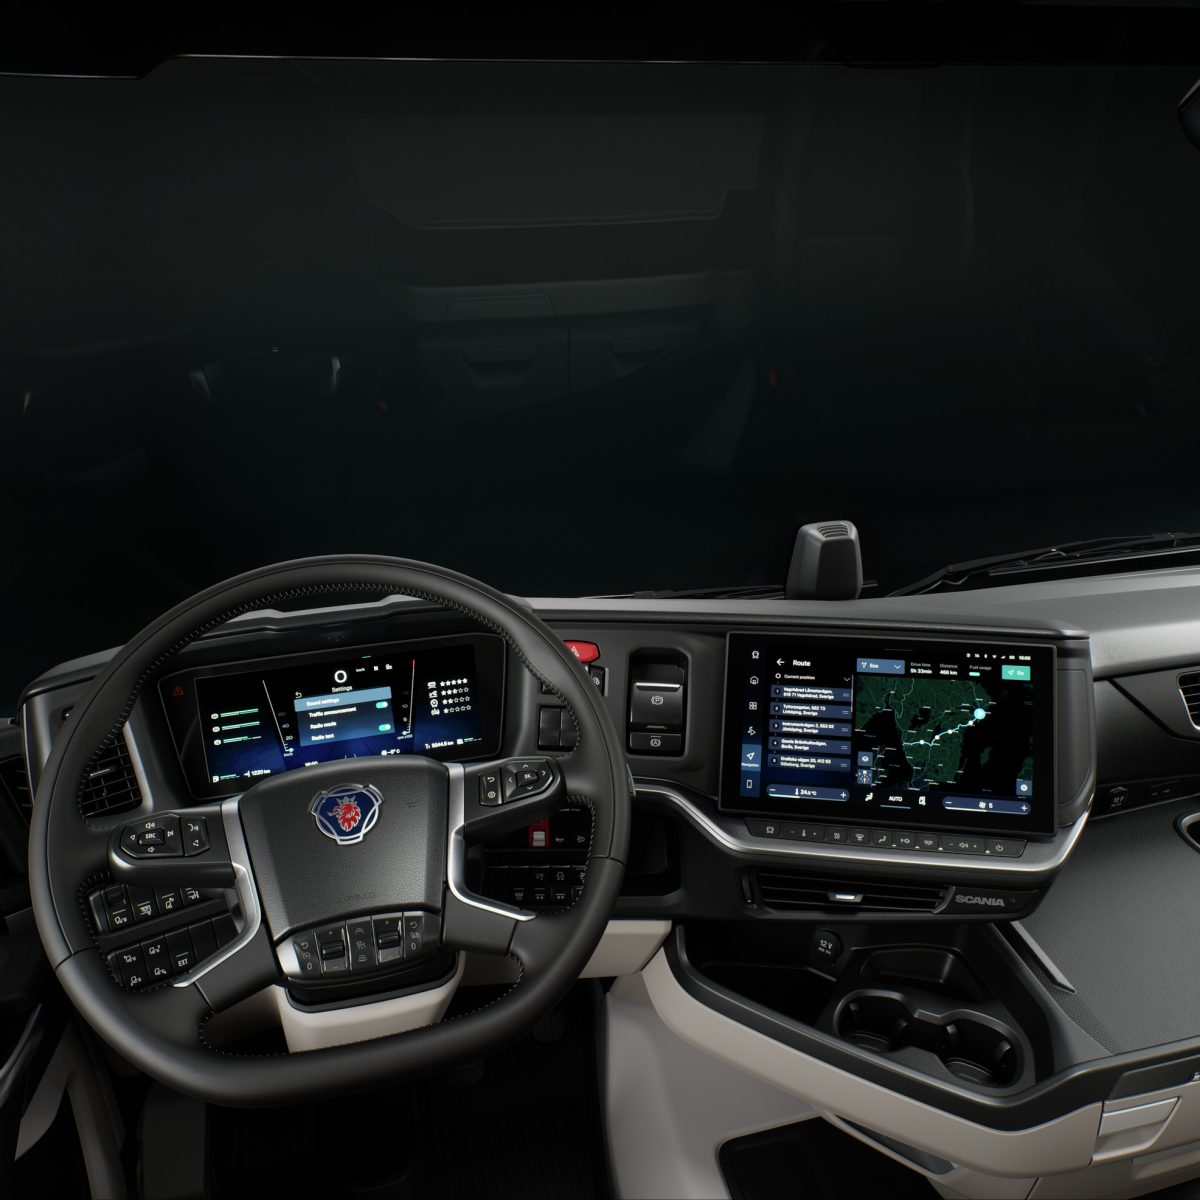 Scania Smart Dash opens up new perspectives for truck drivers